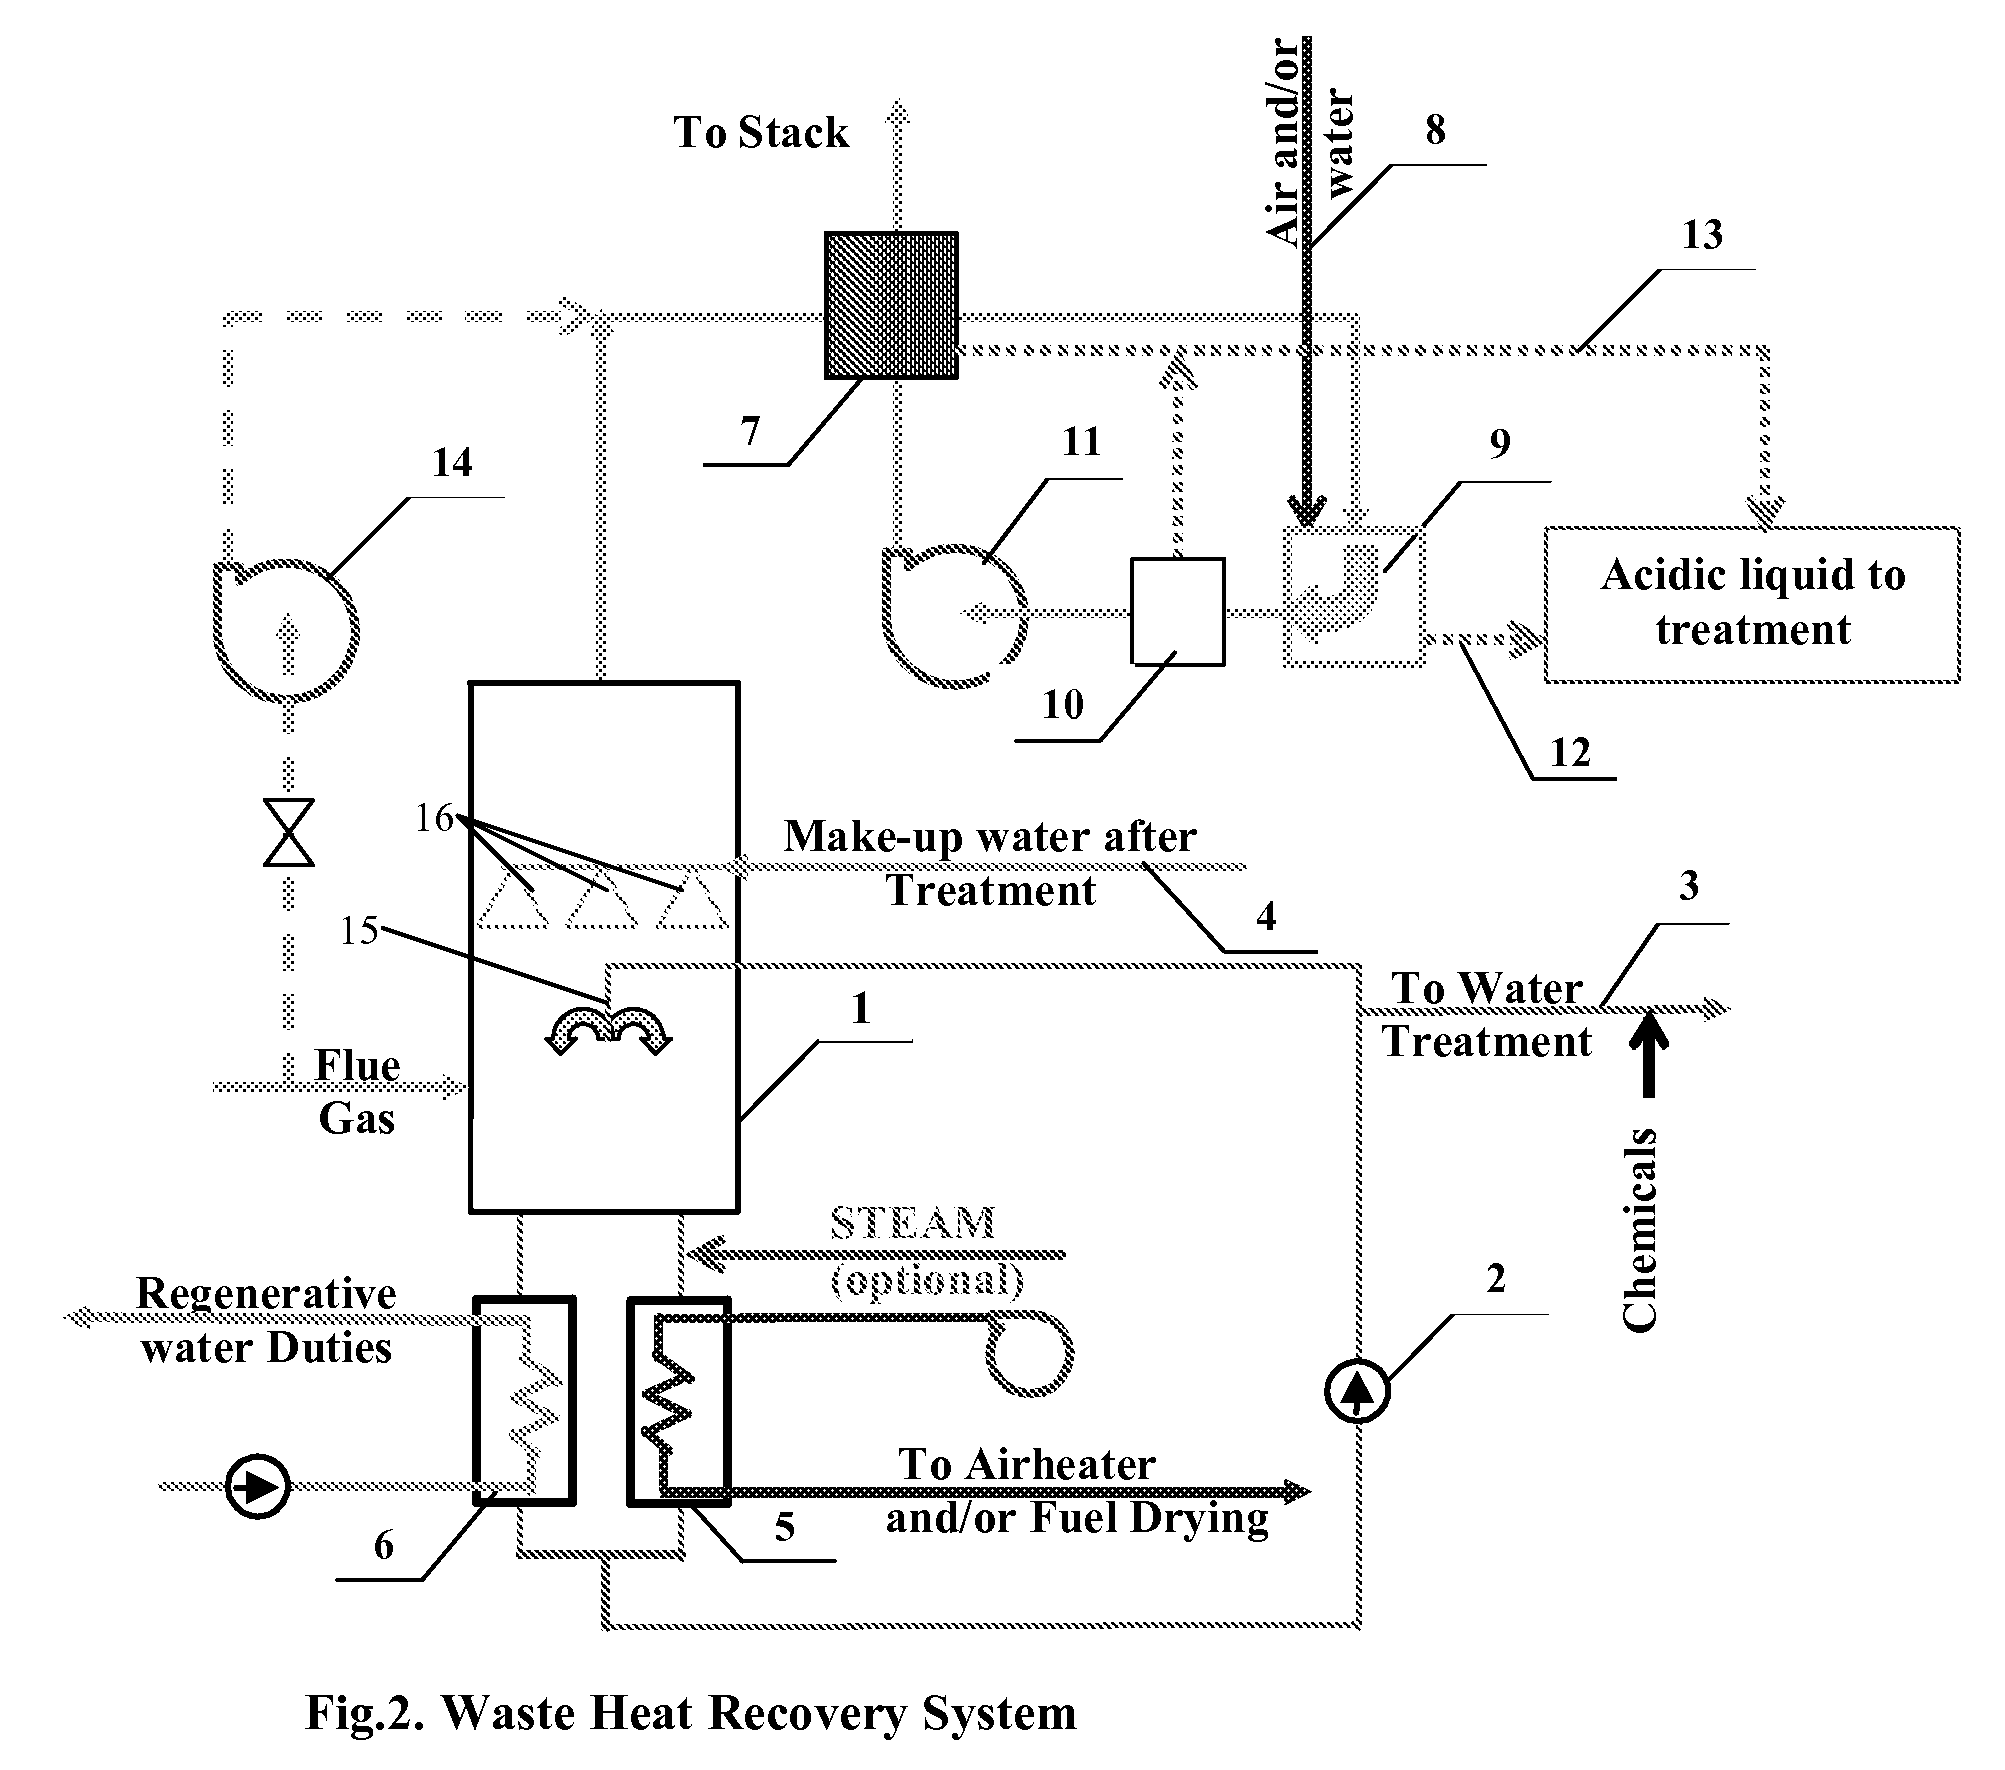 Method of efficiency and emissions performance improvement for the simple steam cycle